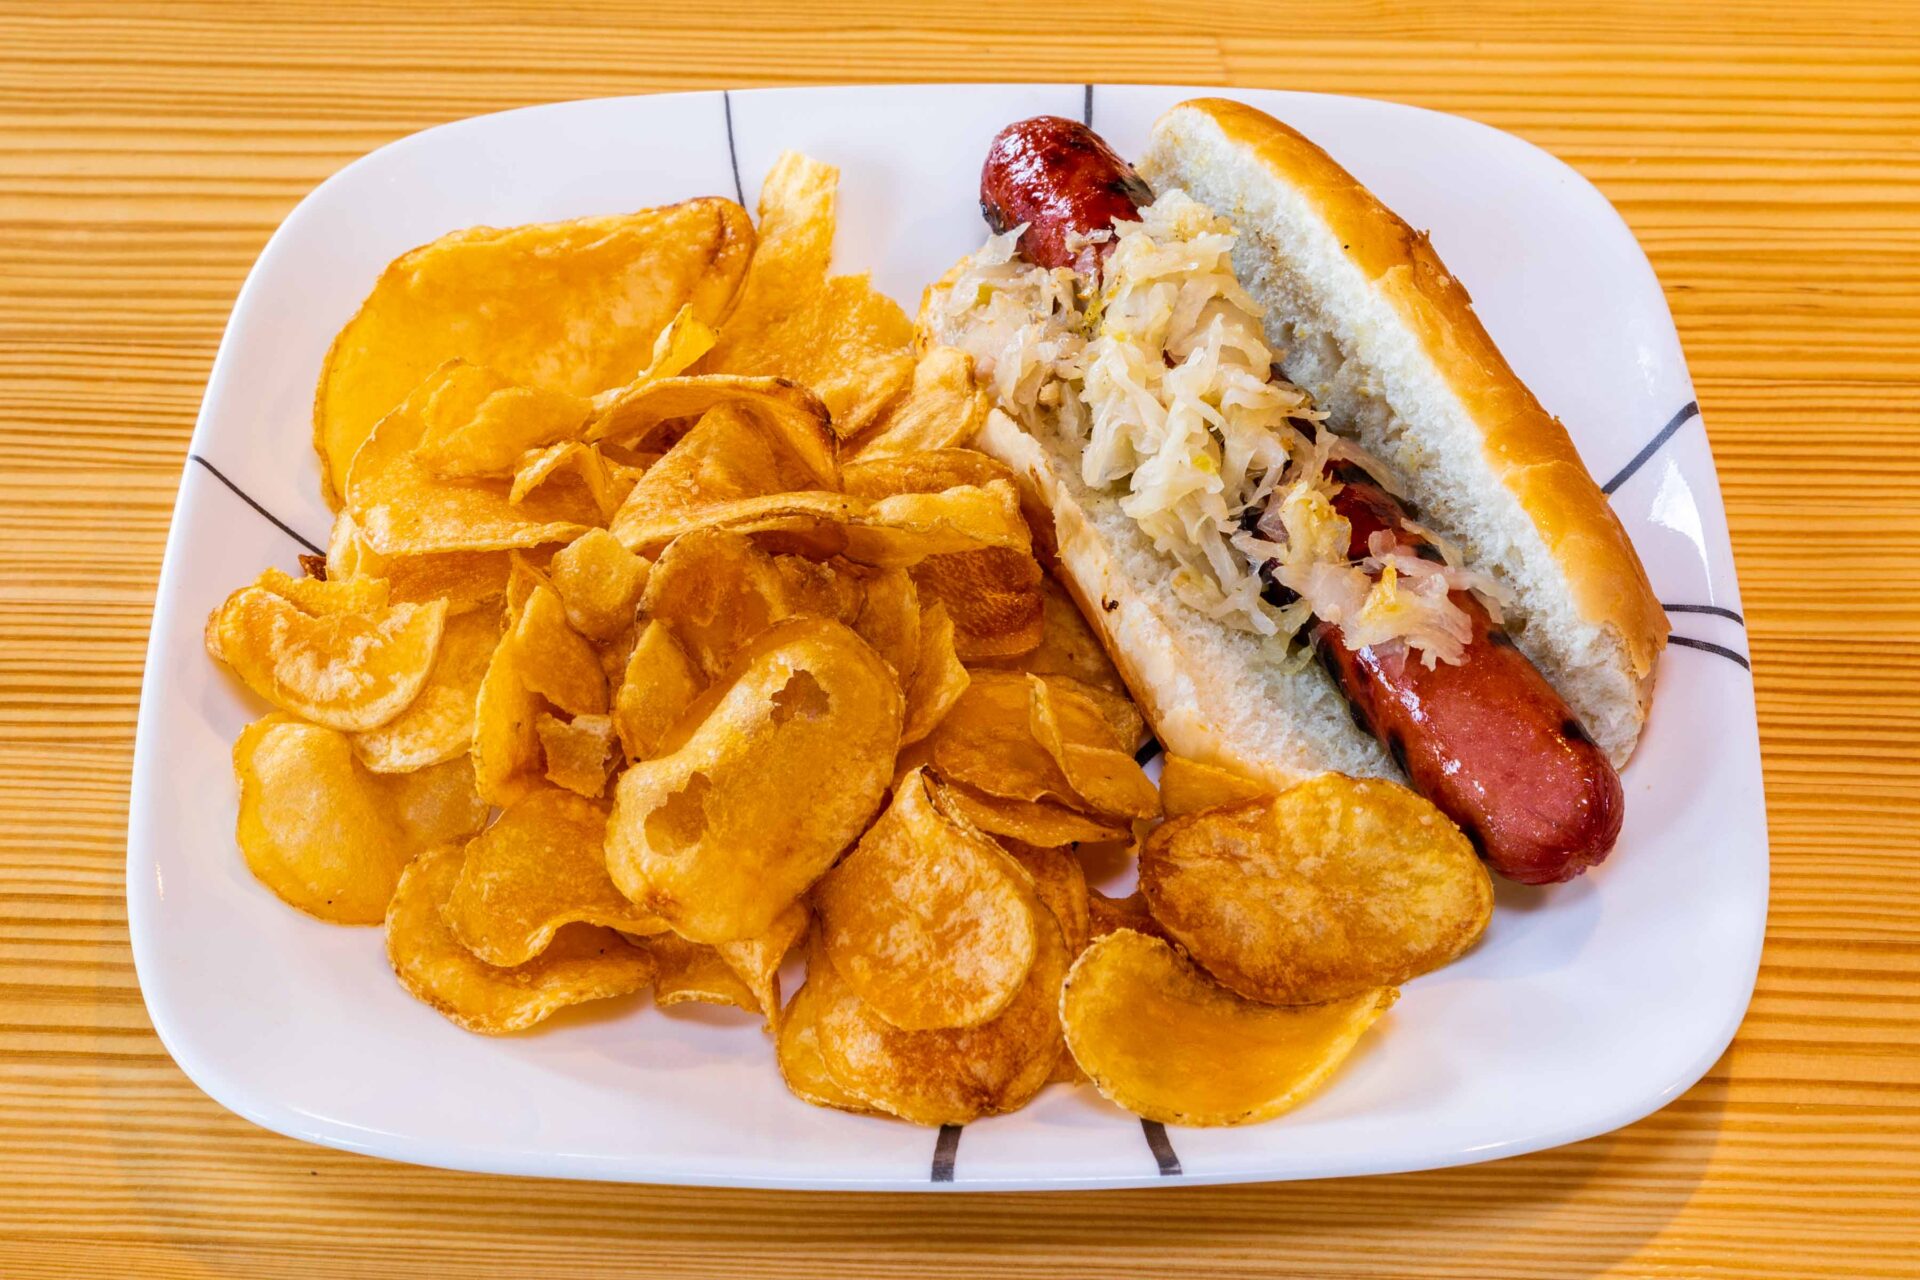 A plate of food with potato chips and hot dog.